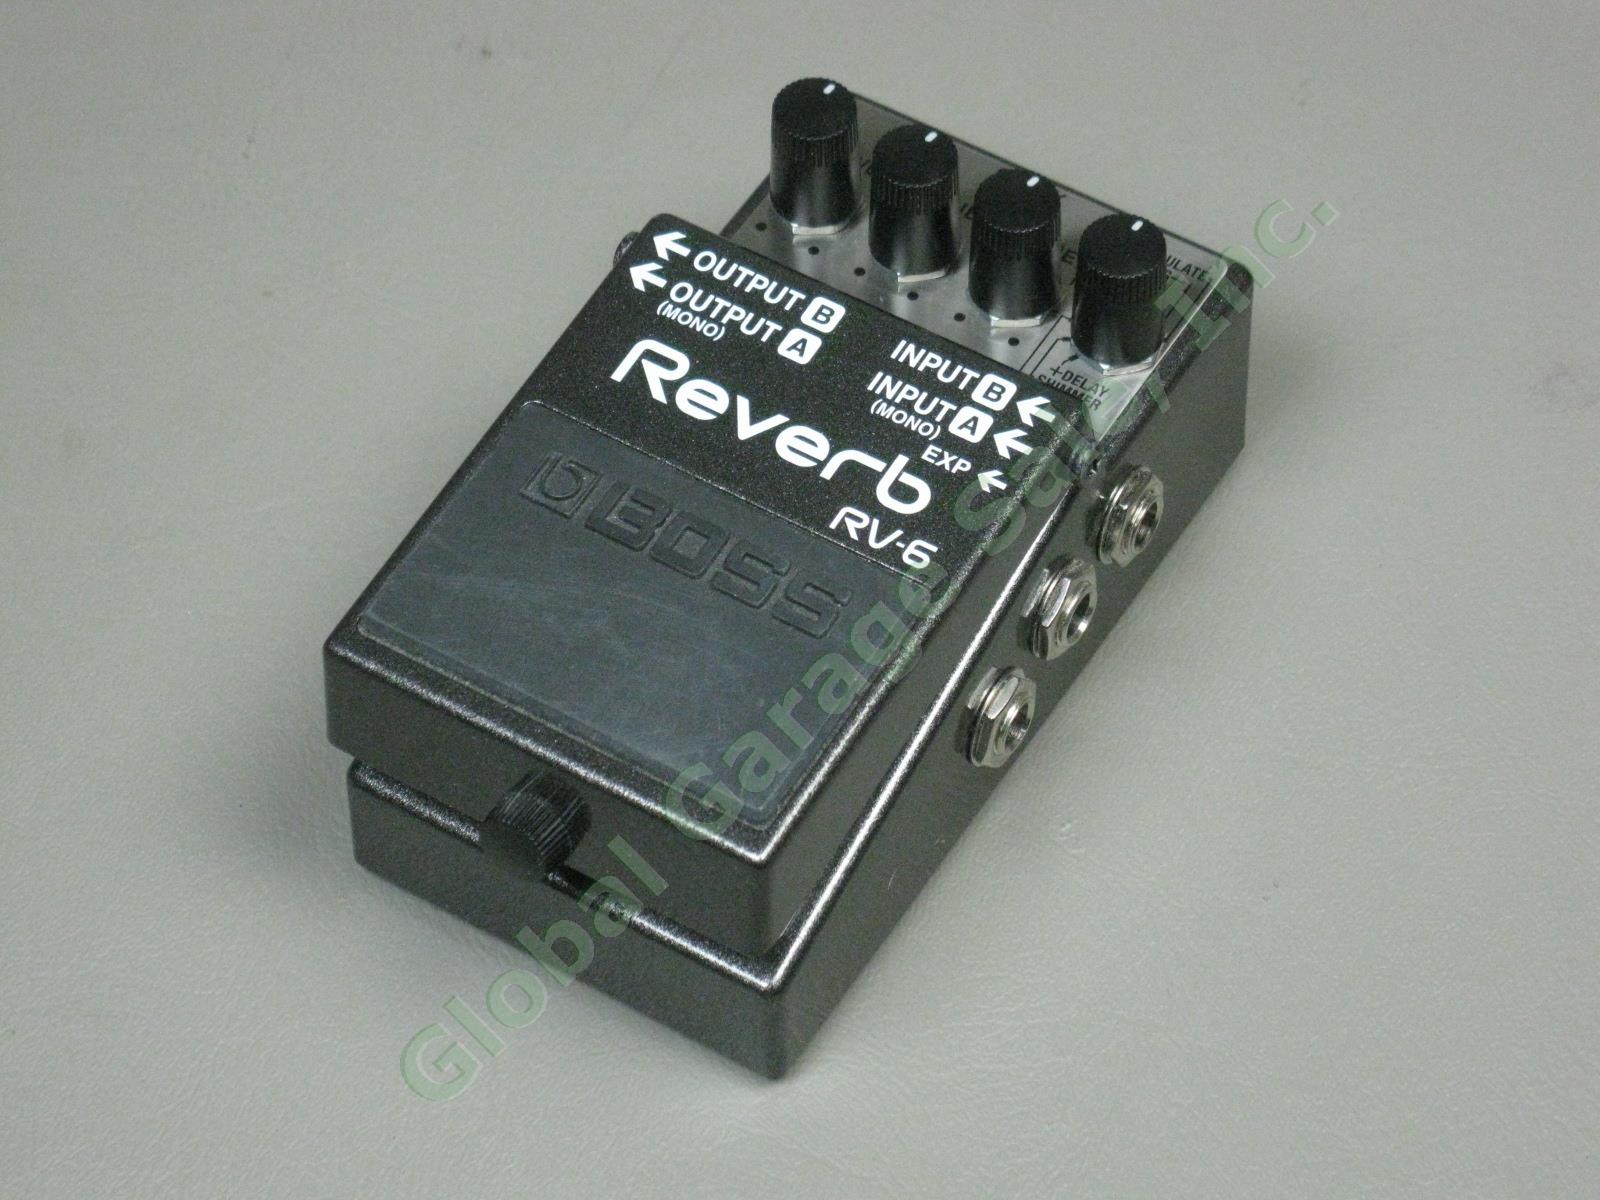 Boss RV-6 Digital Reverb Guitar Effects Pedal Stomp Box One Owner EXC Condition! 1